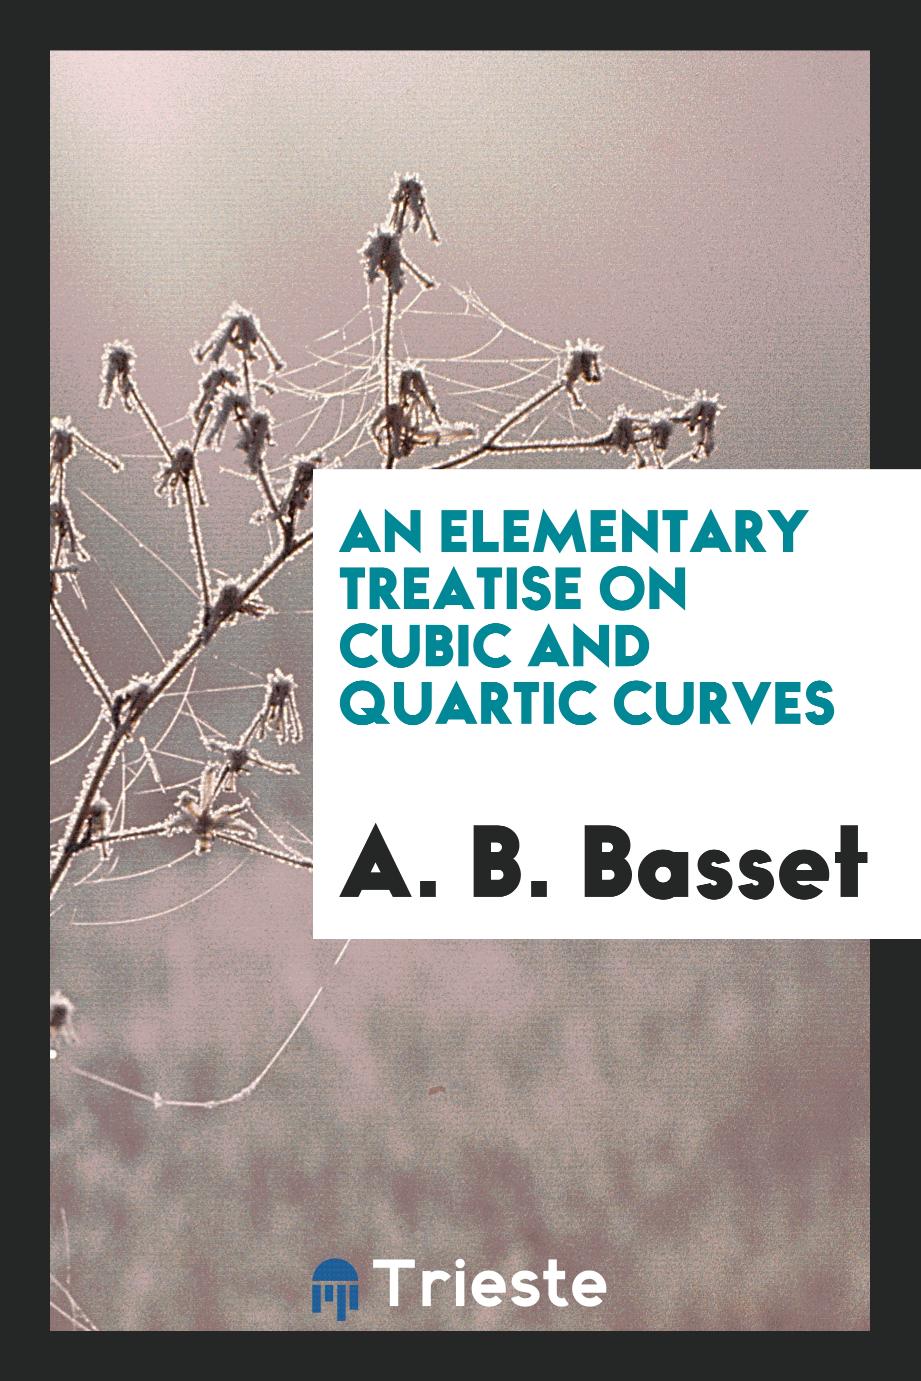 An Elementary Treatise on Cubic and Quartic Curves